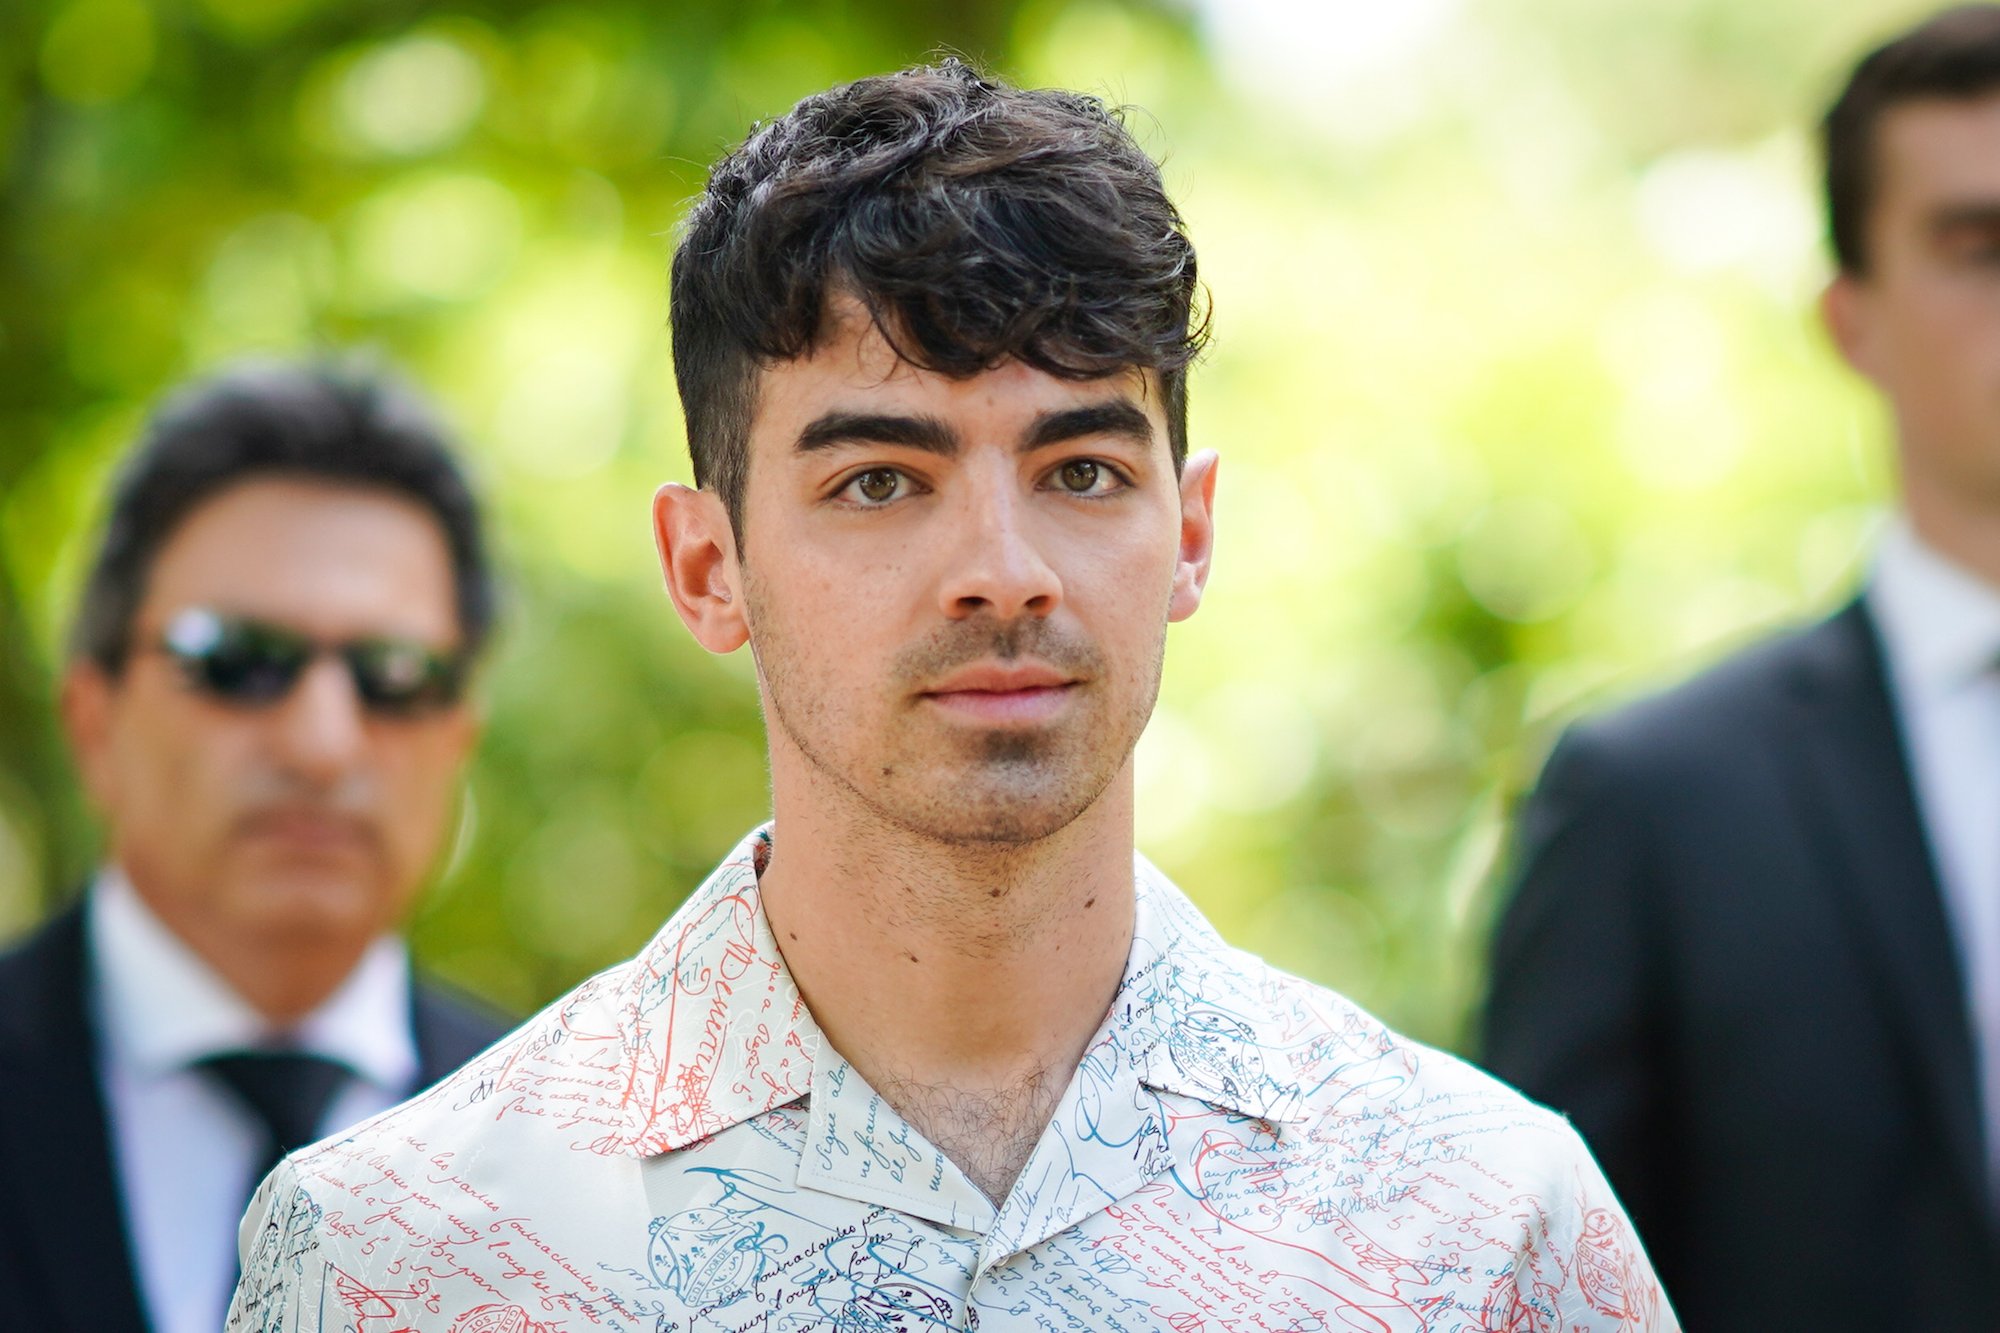 Joe Jonas smiling slightly in front of a blurred background